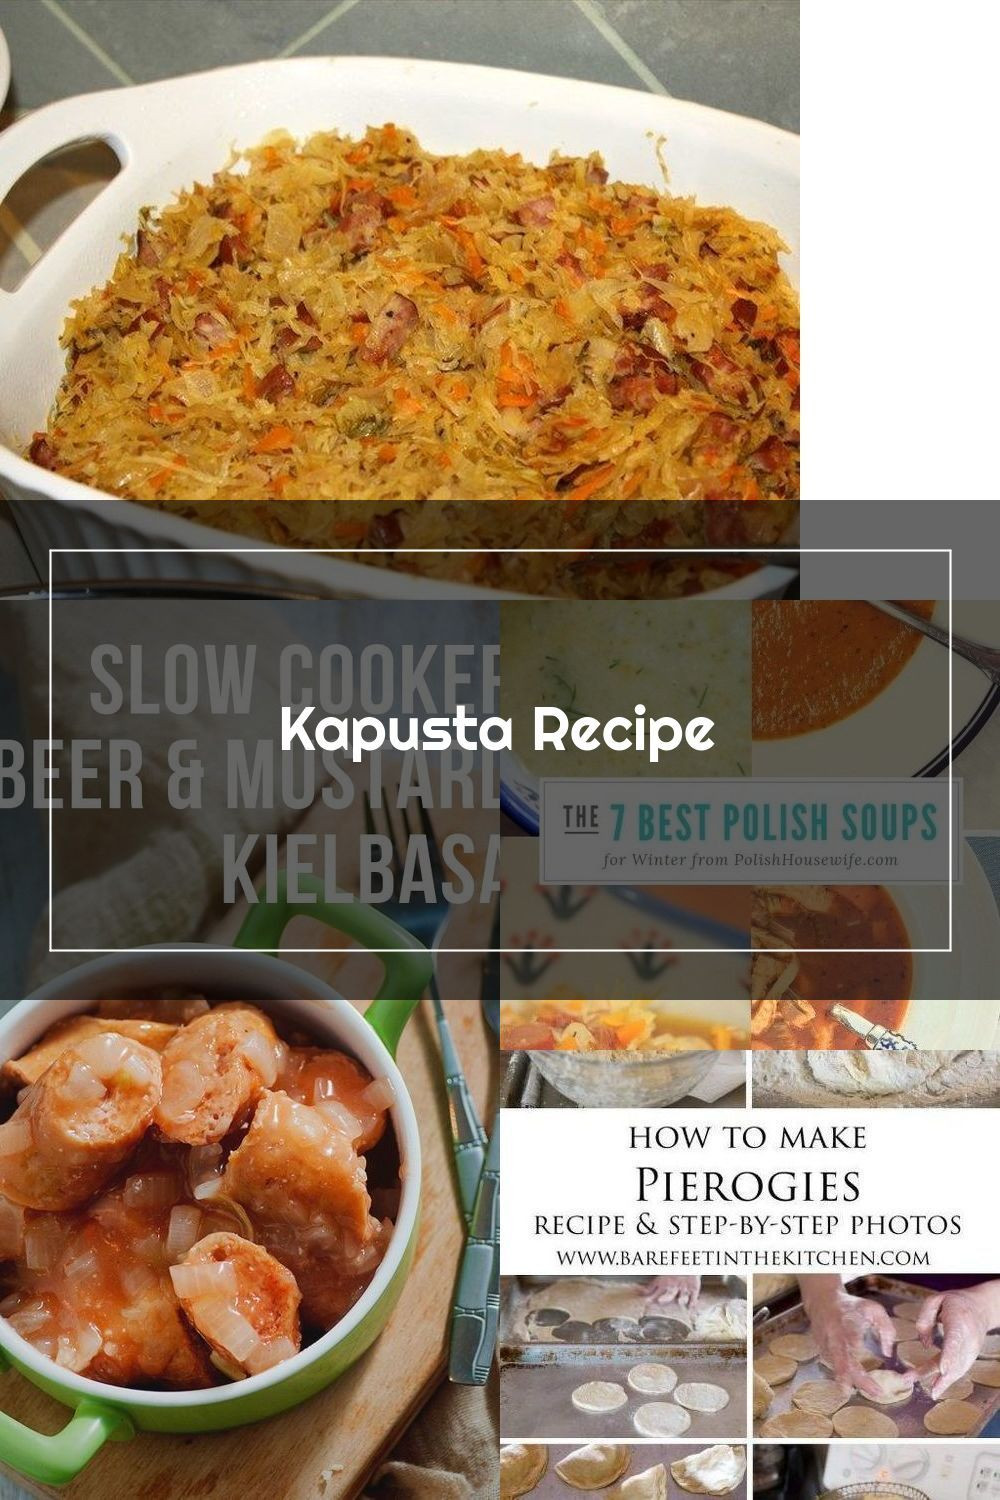 Polish Side Dishes
 This is a polish side dish served traditionally with